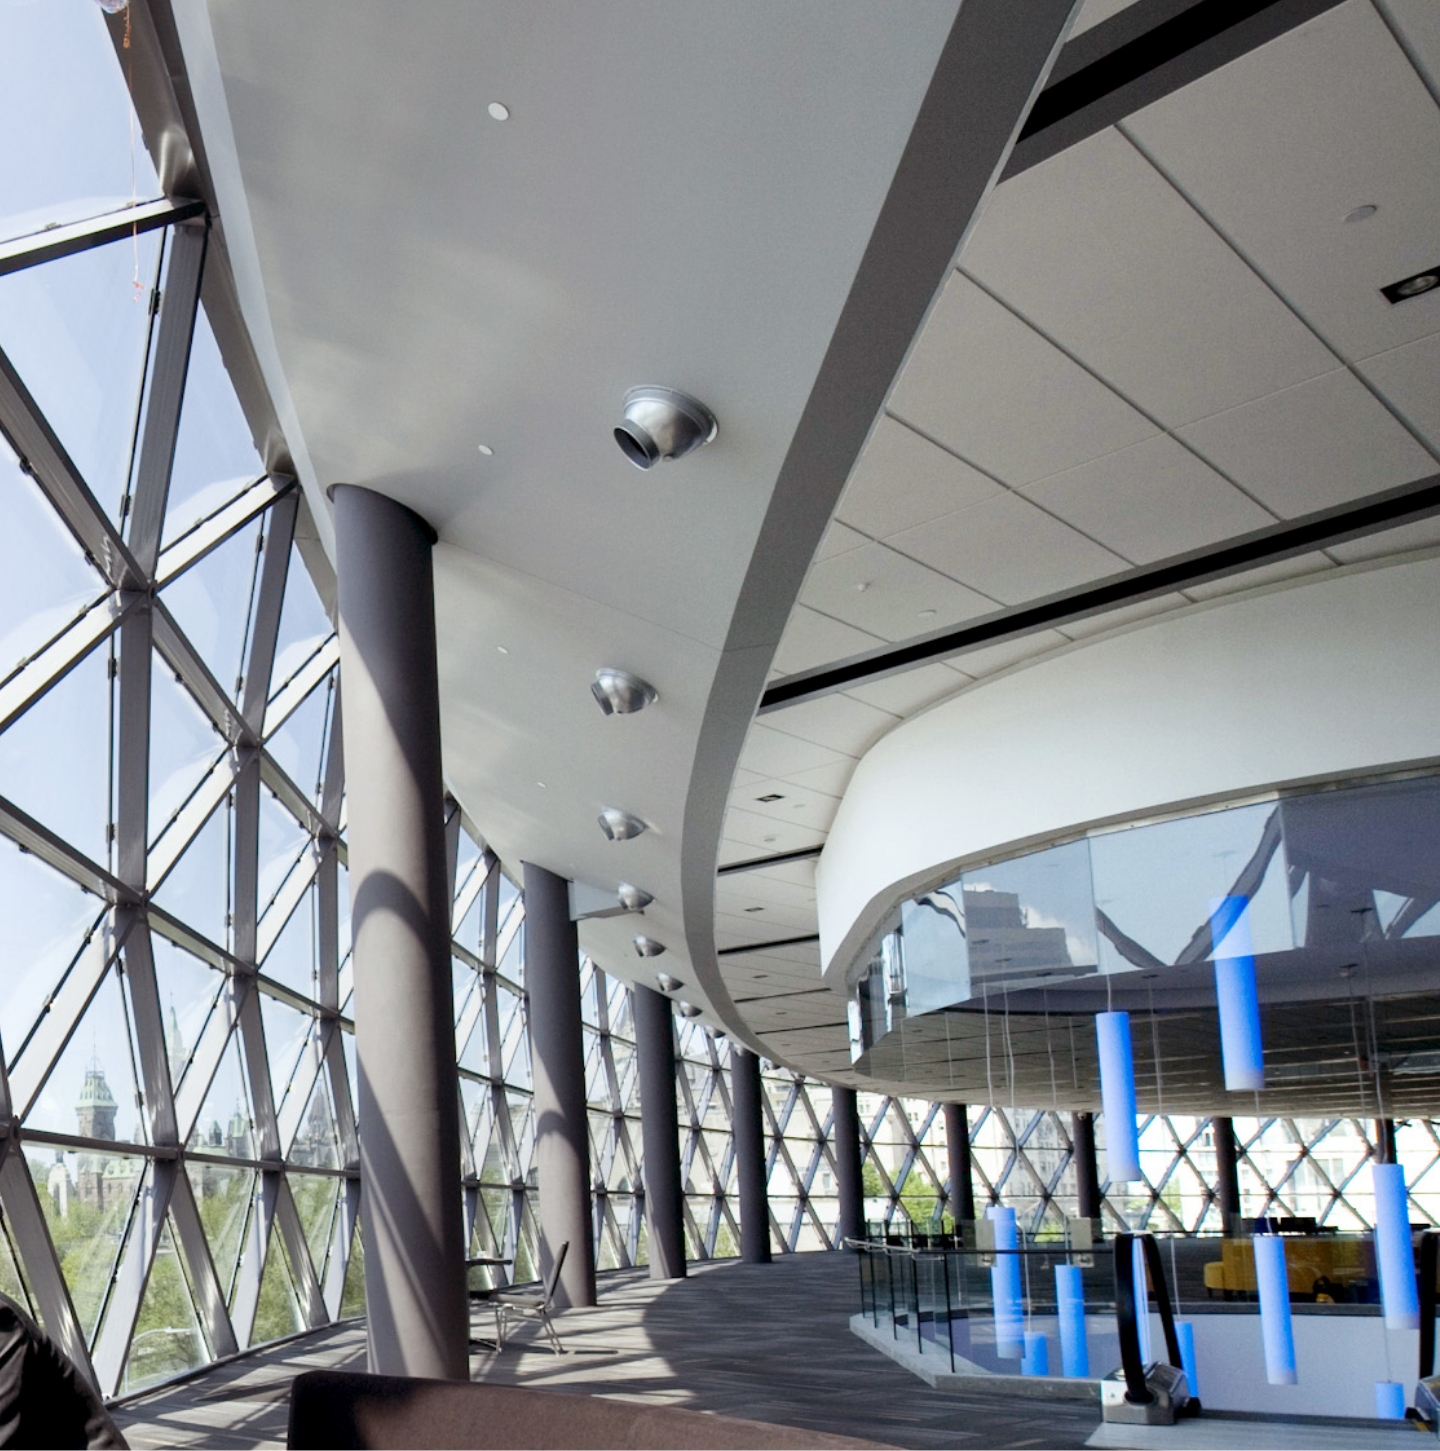 The Shaw Centre's Parliament Foyer on Level 3.